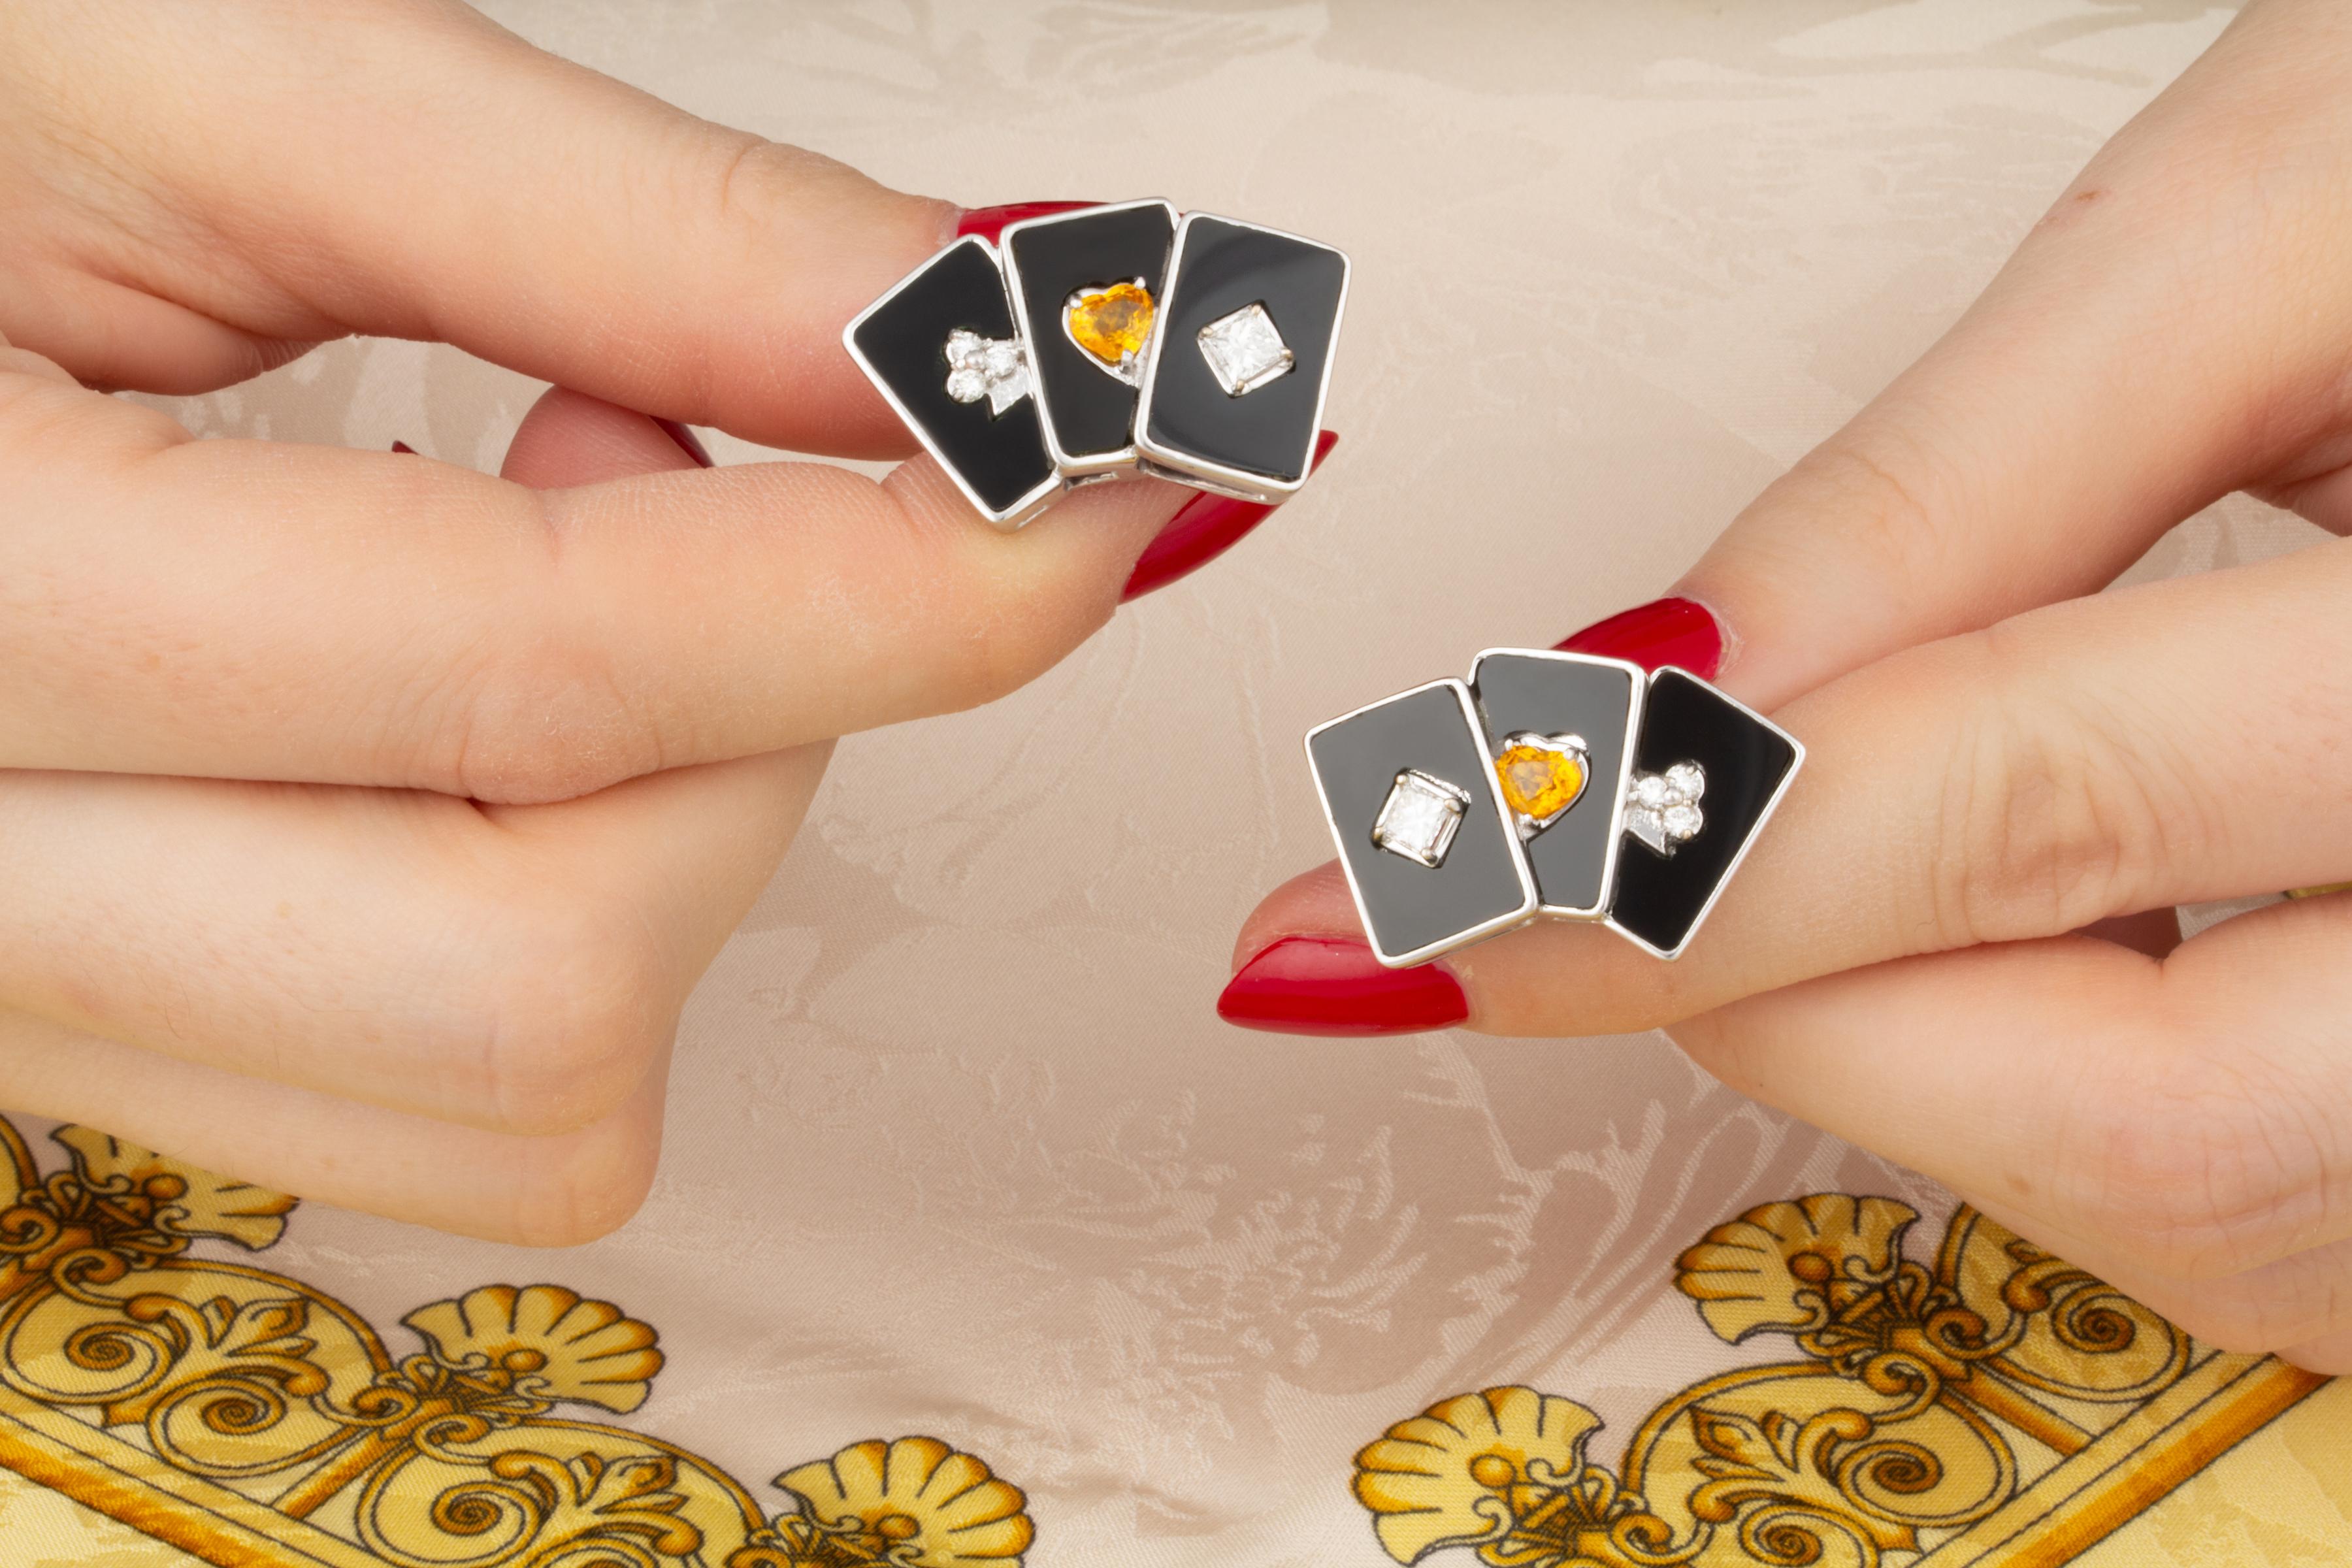 The playing card cufflinks feature diamonds and heart shape yellow sapphires set in custom cut black onyx in a white gold setting, lending the jewel a distinctive art déco look.
The pair is hand made in our own workshop in Naples, Italy, according